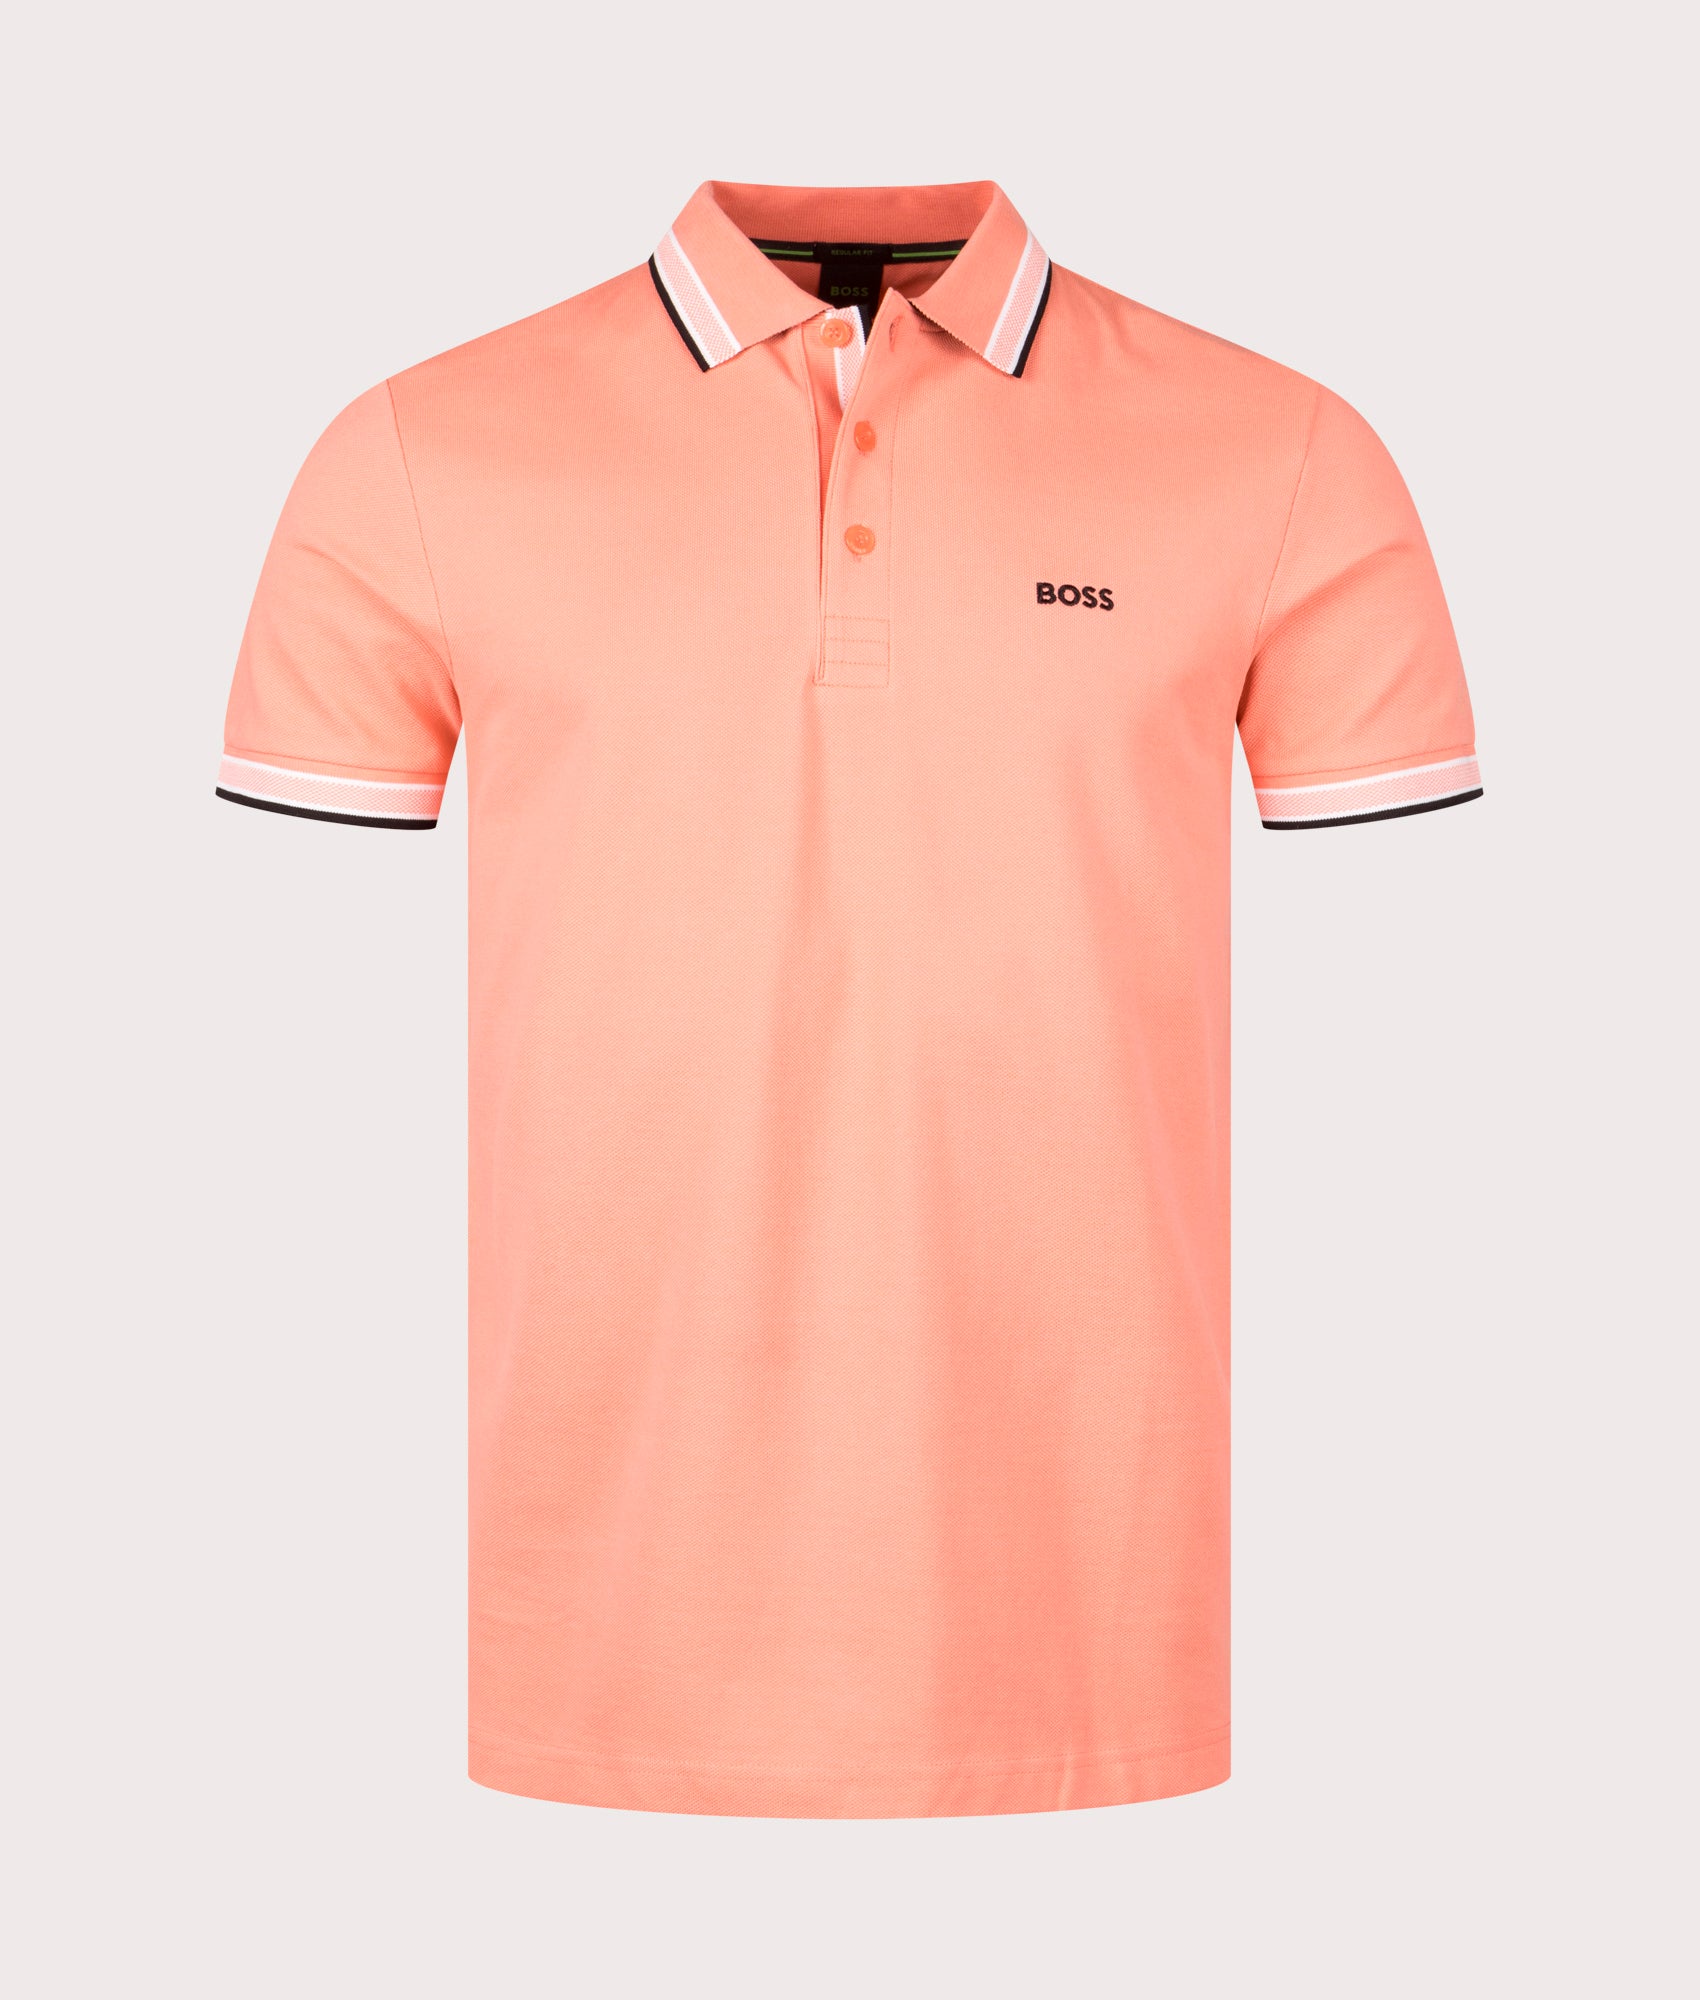 BOSS Mens Paddy Polo Shirt - Colour: 649 Open Red - Size: XXL